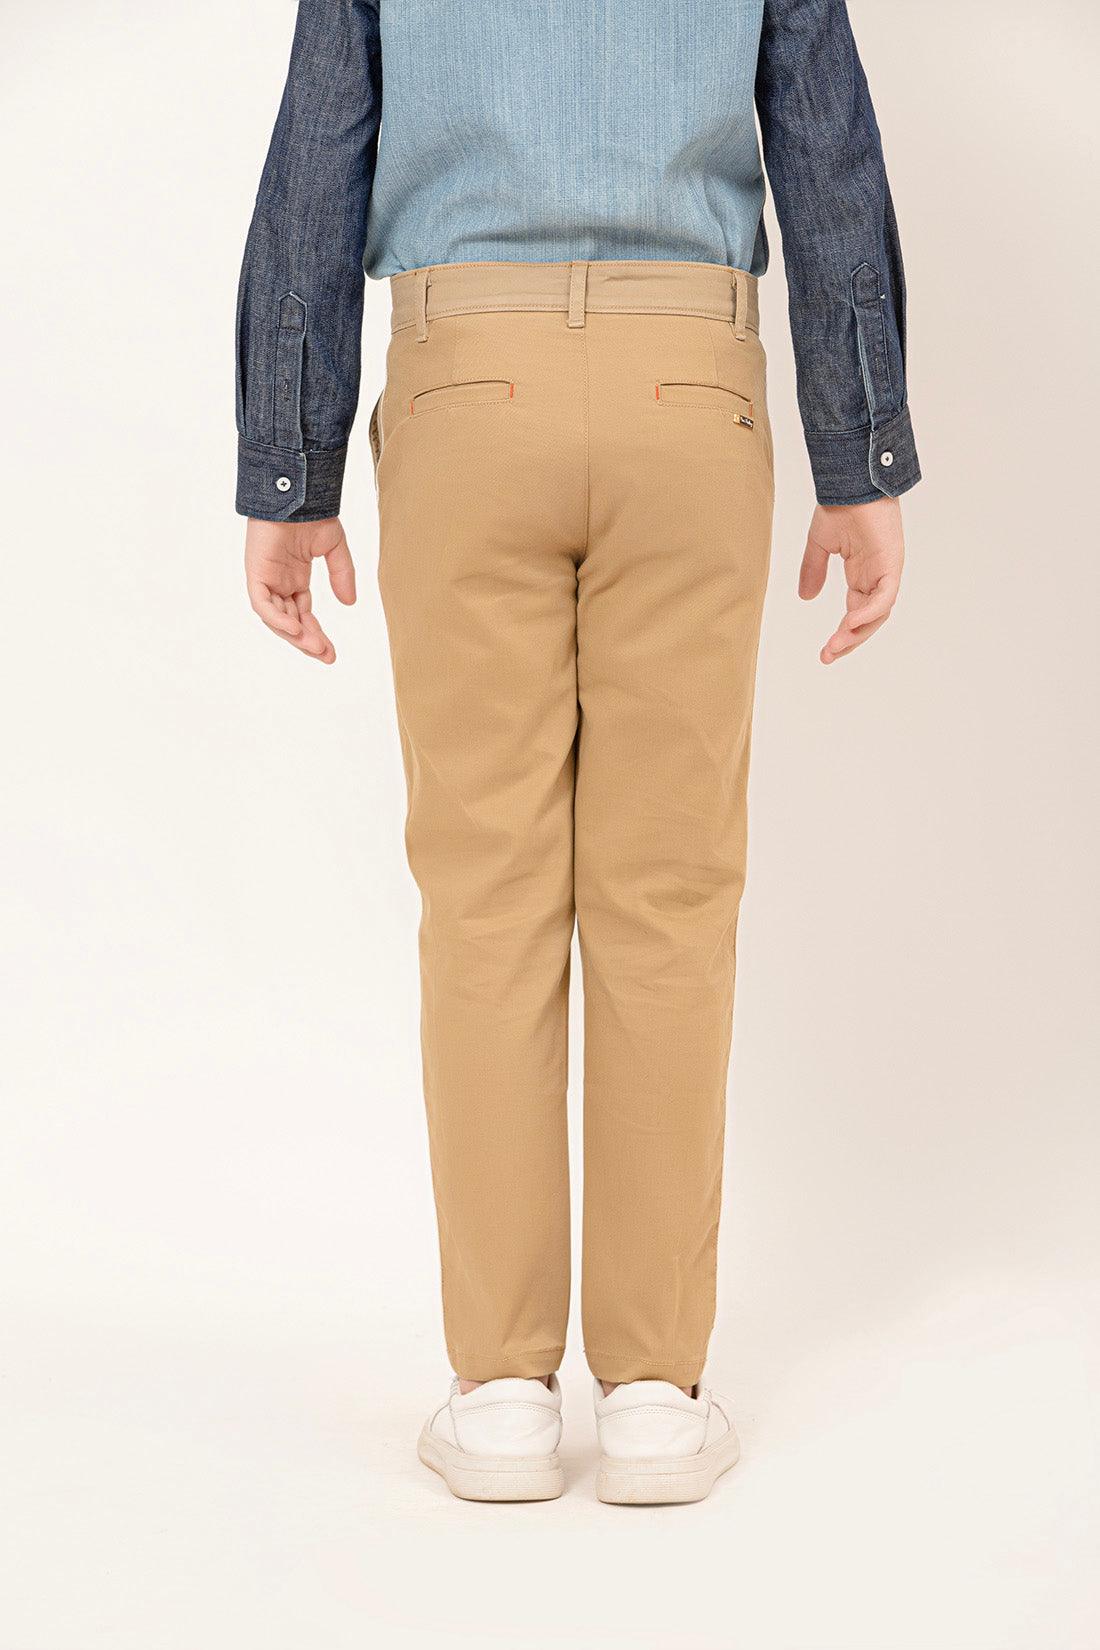 One Friday Varsity Chic Beige Comfort-fit Pants for Boys